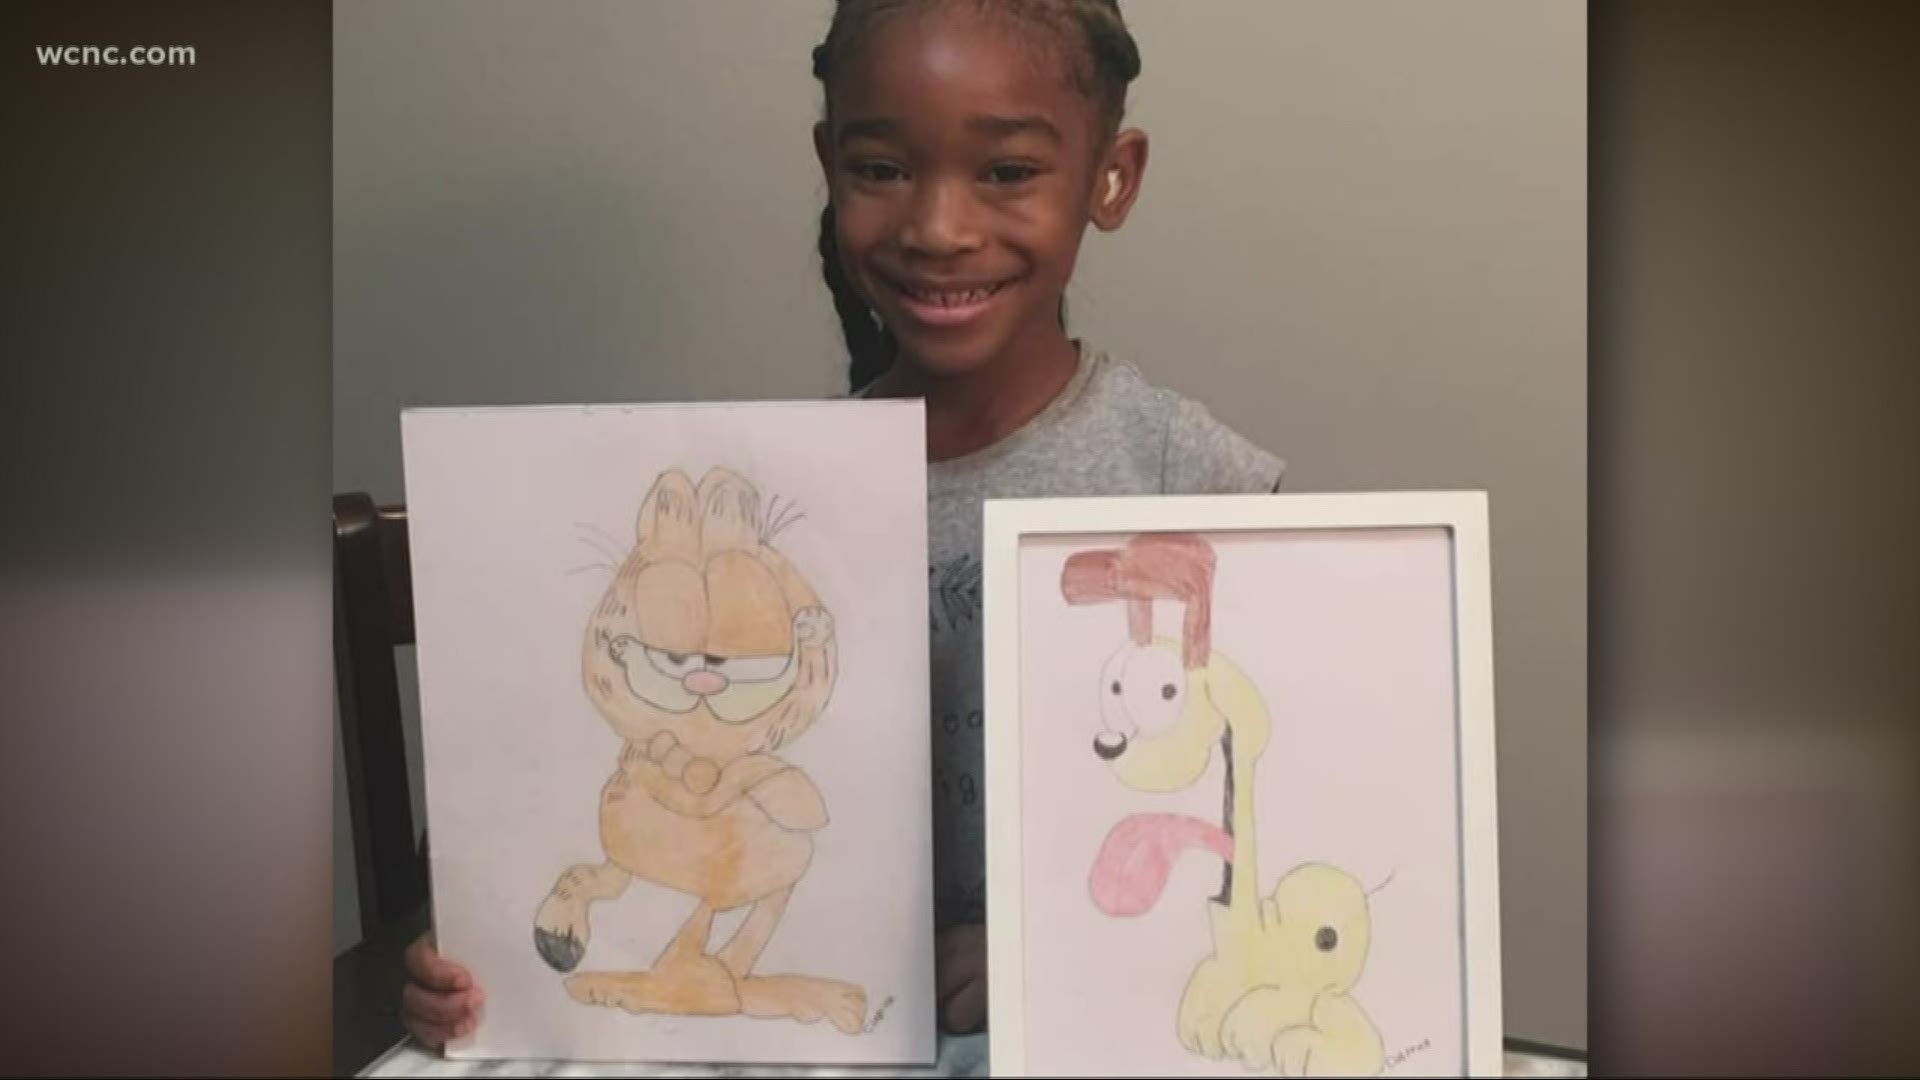 Through social media, the 5-year-old's artwork of Garfield and Odie got back to the cartoon's creator, Jim Davis.